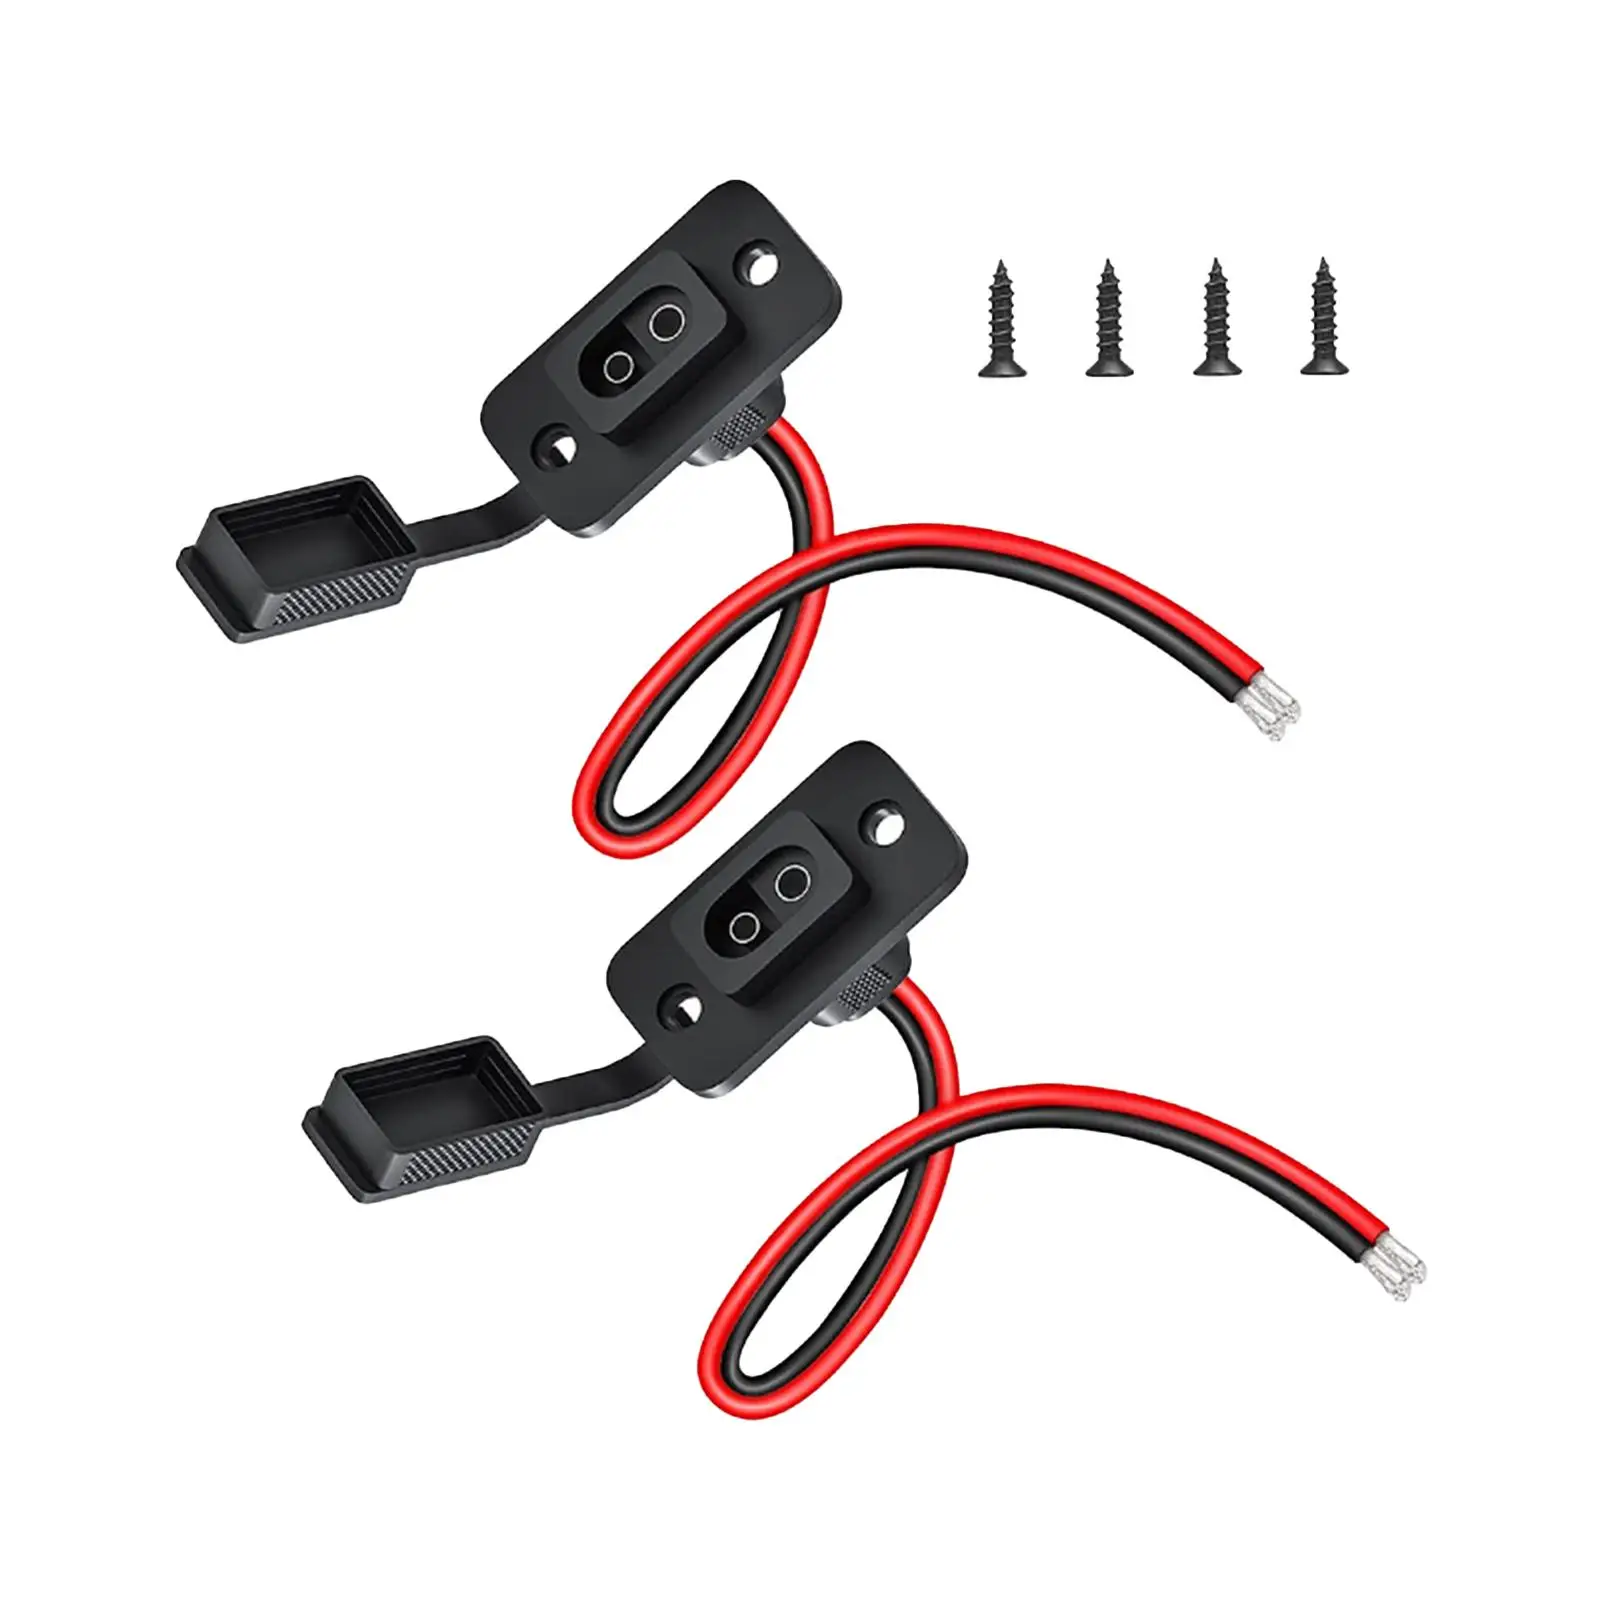 2Pcs SAE Socket Sidewall Port RV Cars 30A Flush-mountable Weatherproof Motorcycle SAE Plug Charging Cable SAE Battery Connector